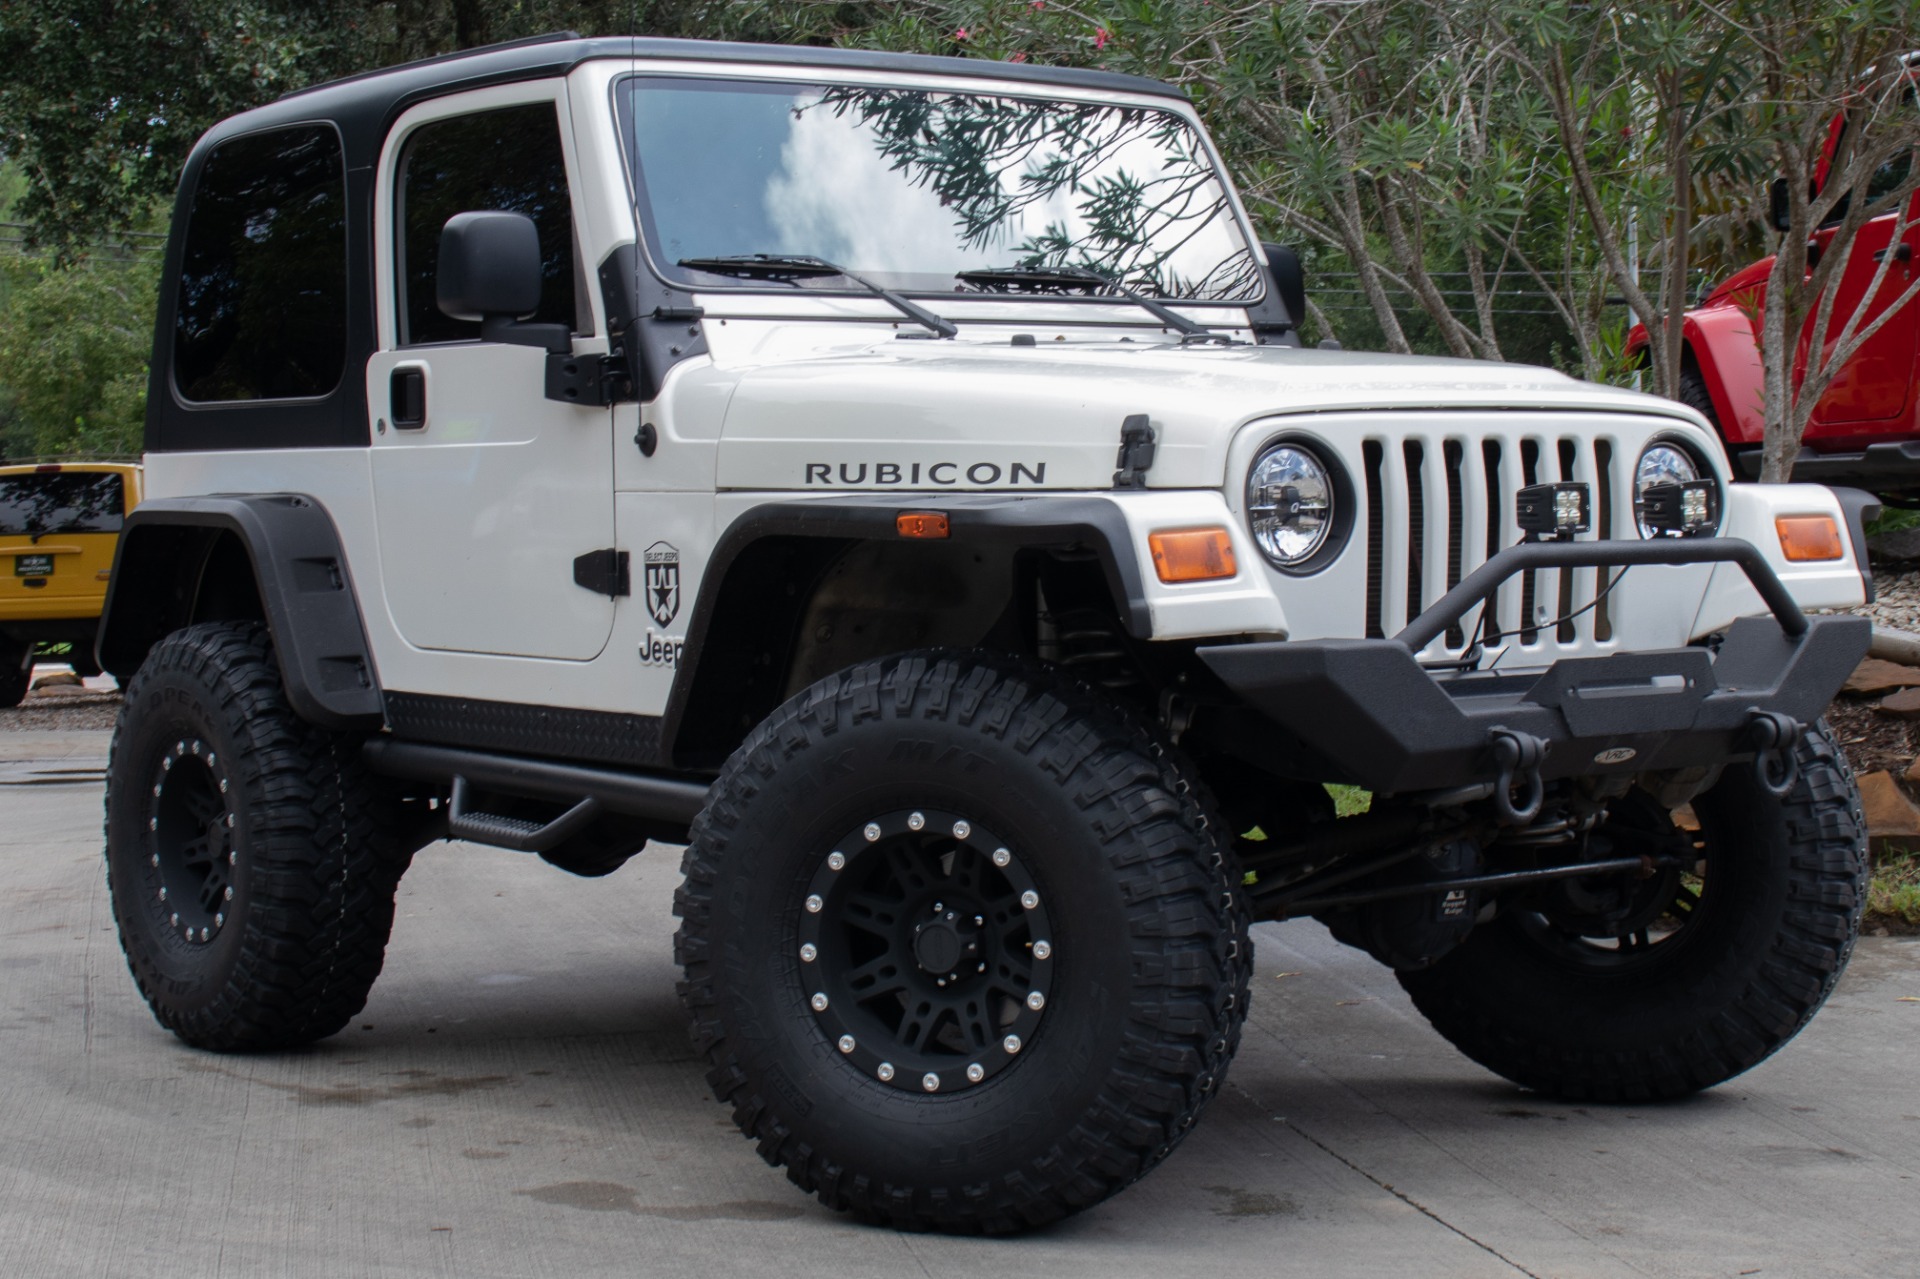 Used 2004 Jeep Wrangler Rubicon For Sale ($18,995) | Select Jeeps Inc.  Stock #736251